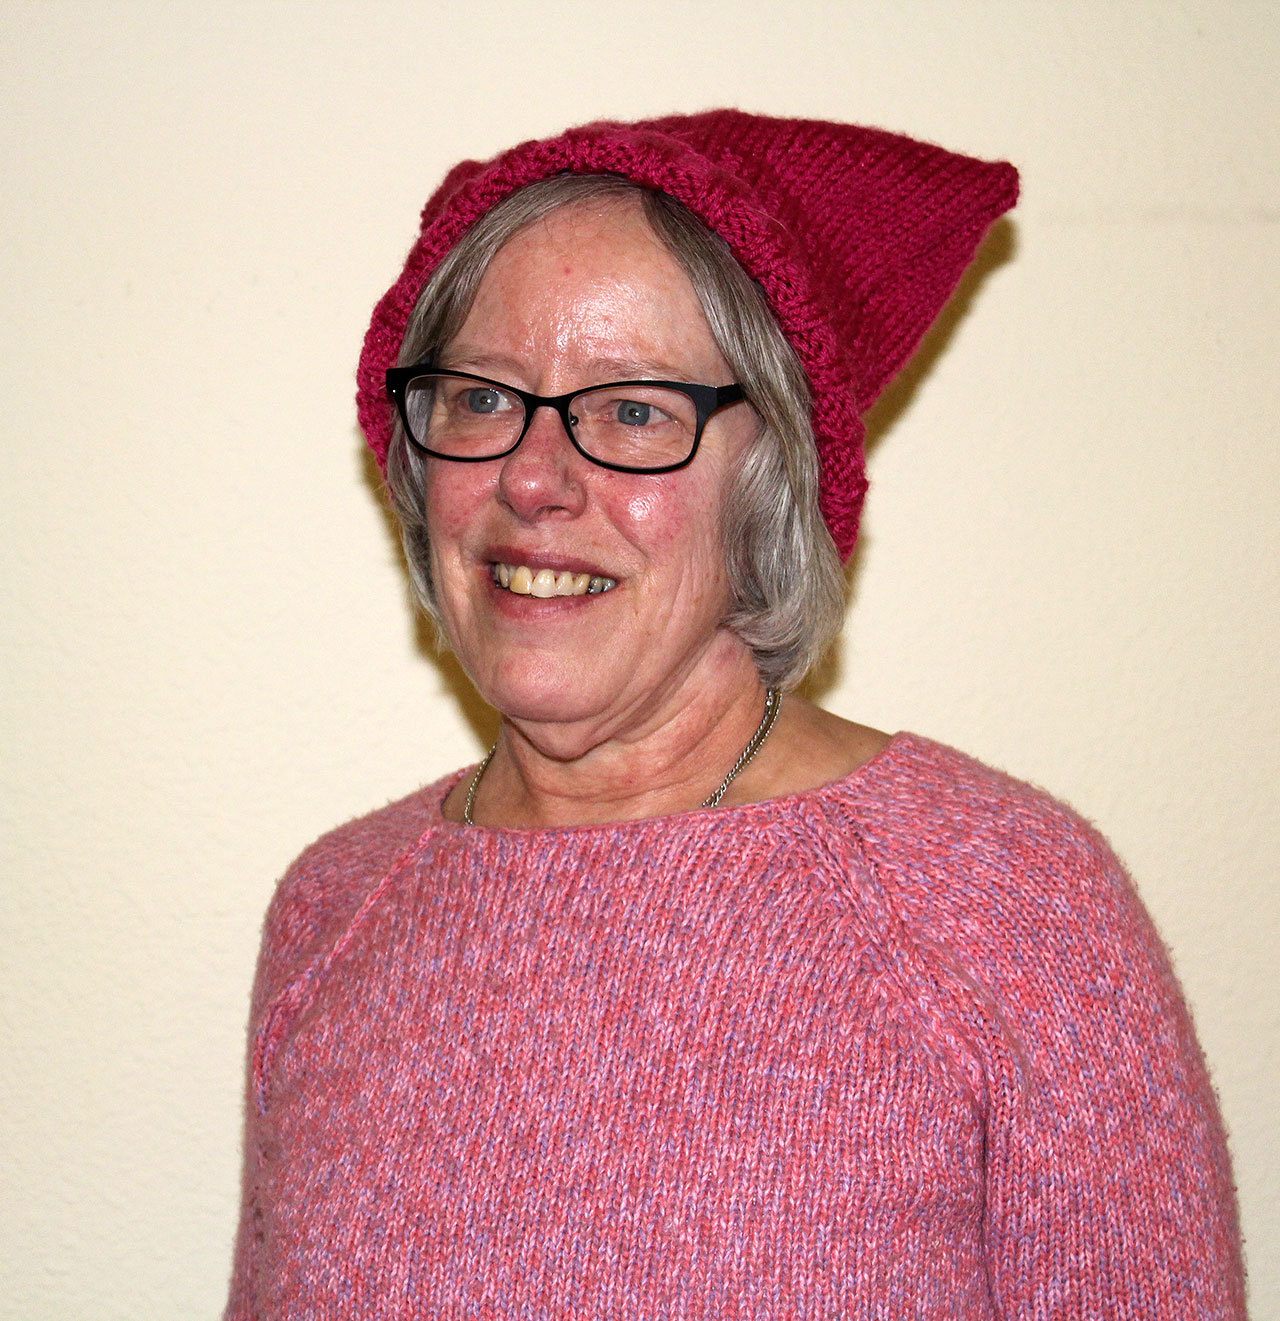 Kay Daling, 66, of Silverdale, still wears the pink “pussy” hat she made for the Women’s March in Washington D.C. as a reminder. “I don’t want to do one thing and let it drop,” she said. “I feel like I have an obligation, if I care, tocontinue it. And it’s one way for me to say, I still stand for this.”                                Michelle Beahm / Kitsap News Group